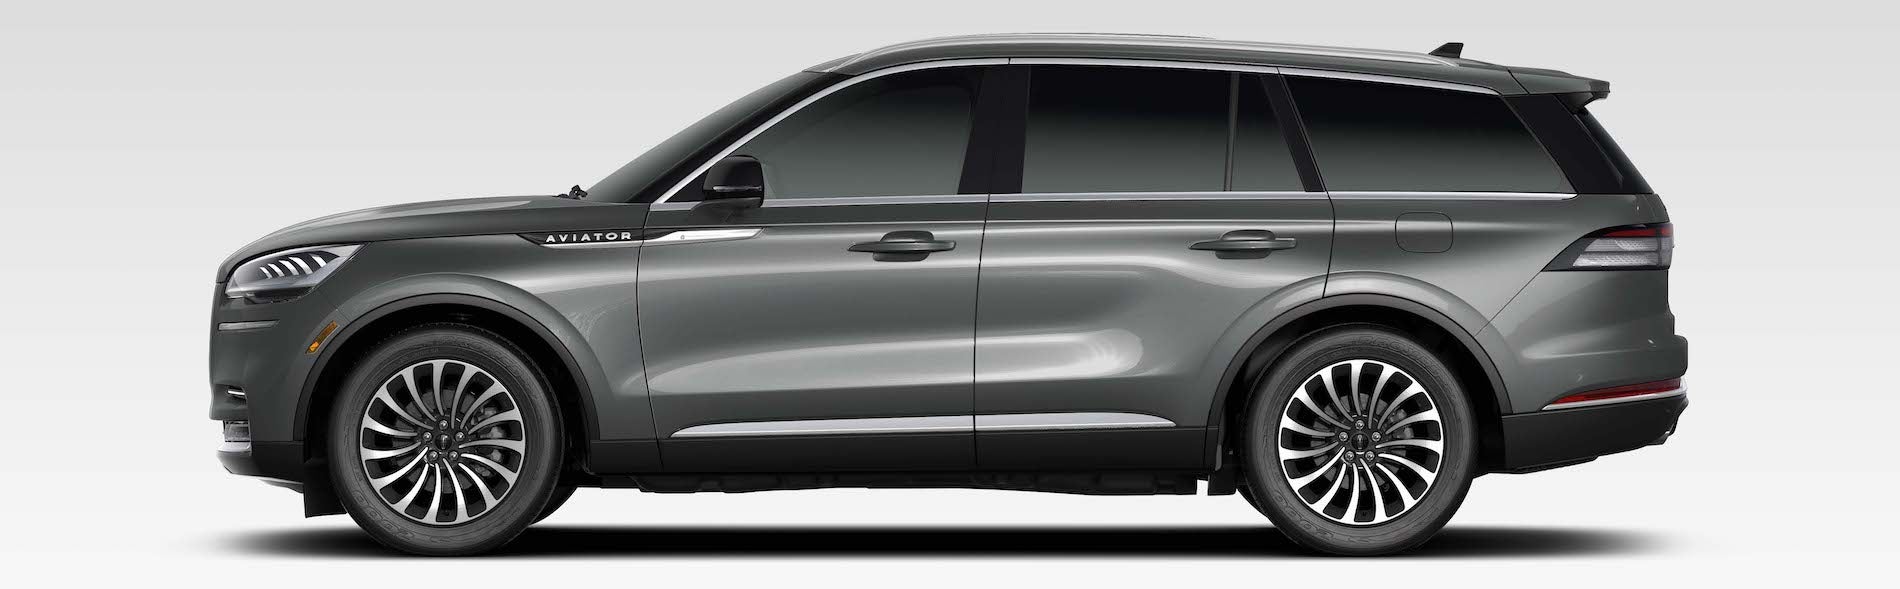 2021 Lincoln Aviator Silver Side View